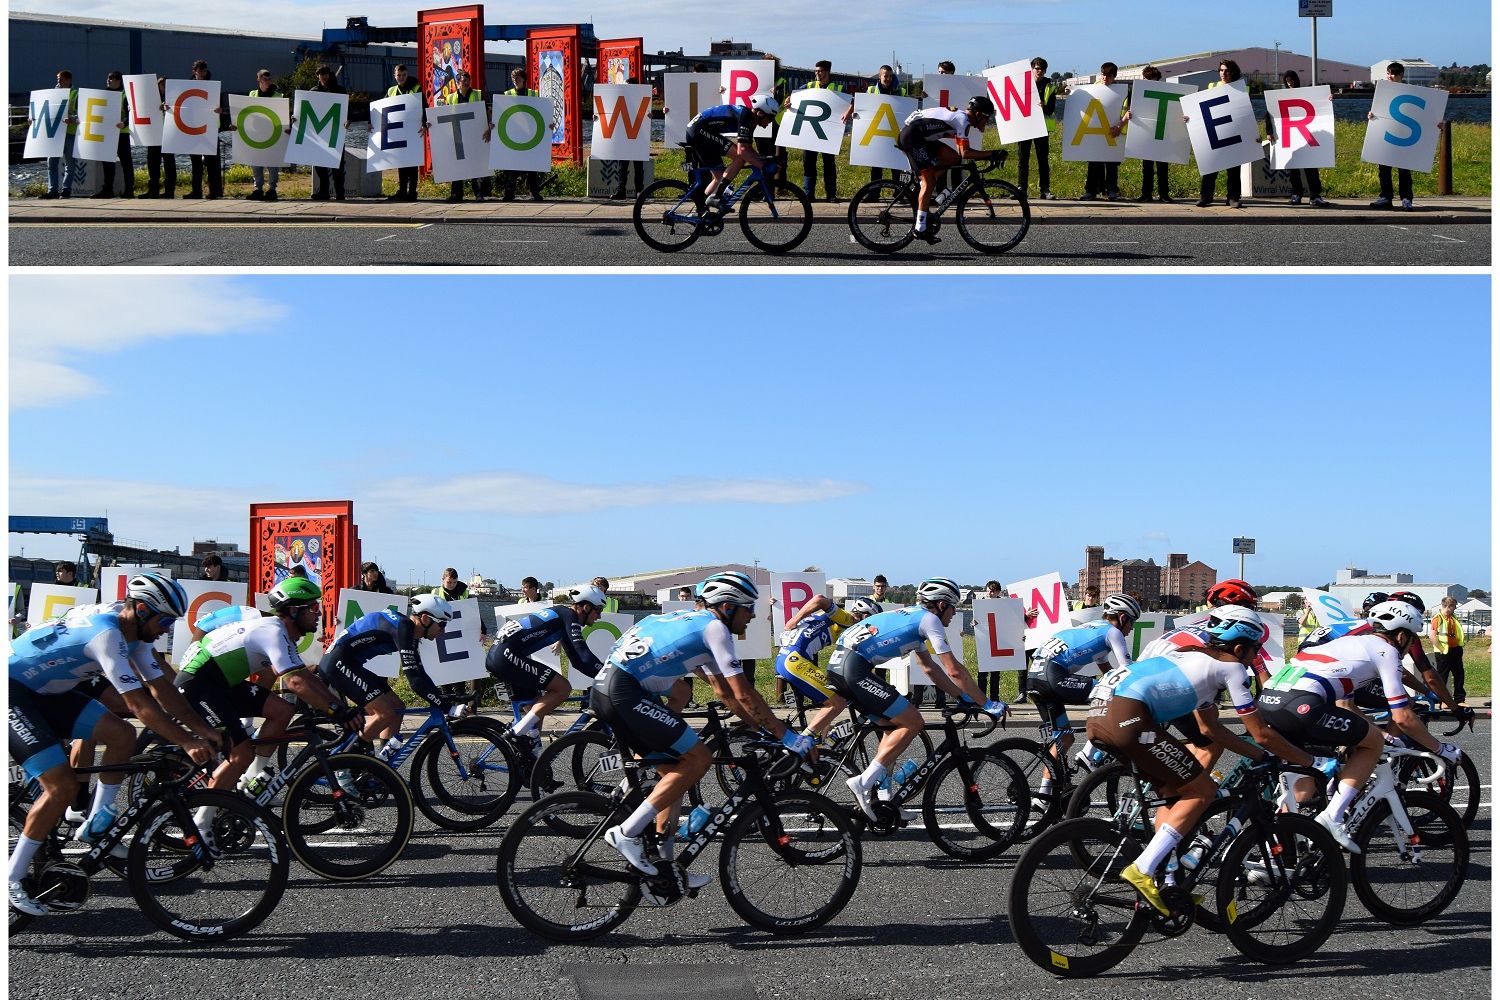 Tour of Britain at Wirral Waters 2019